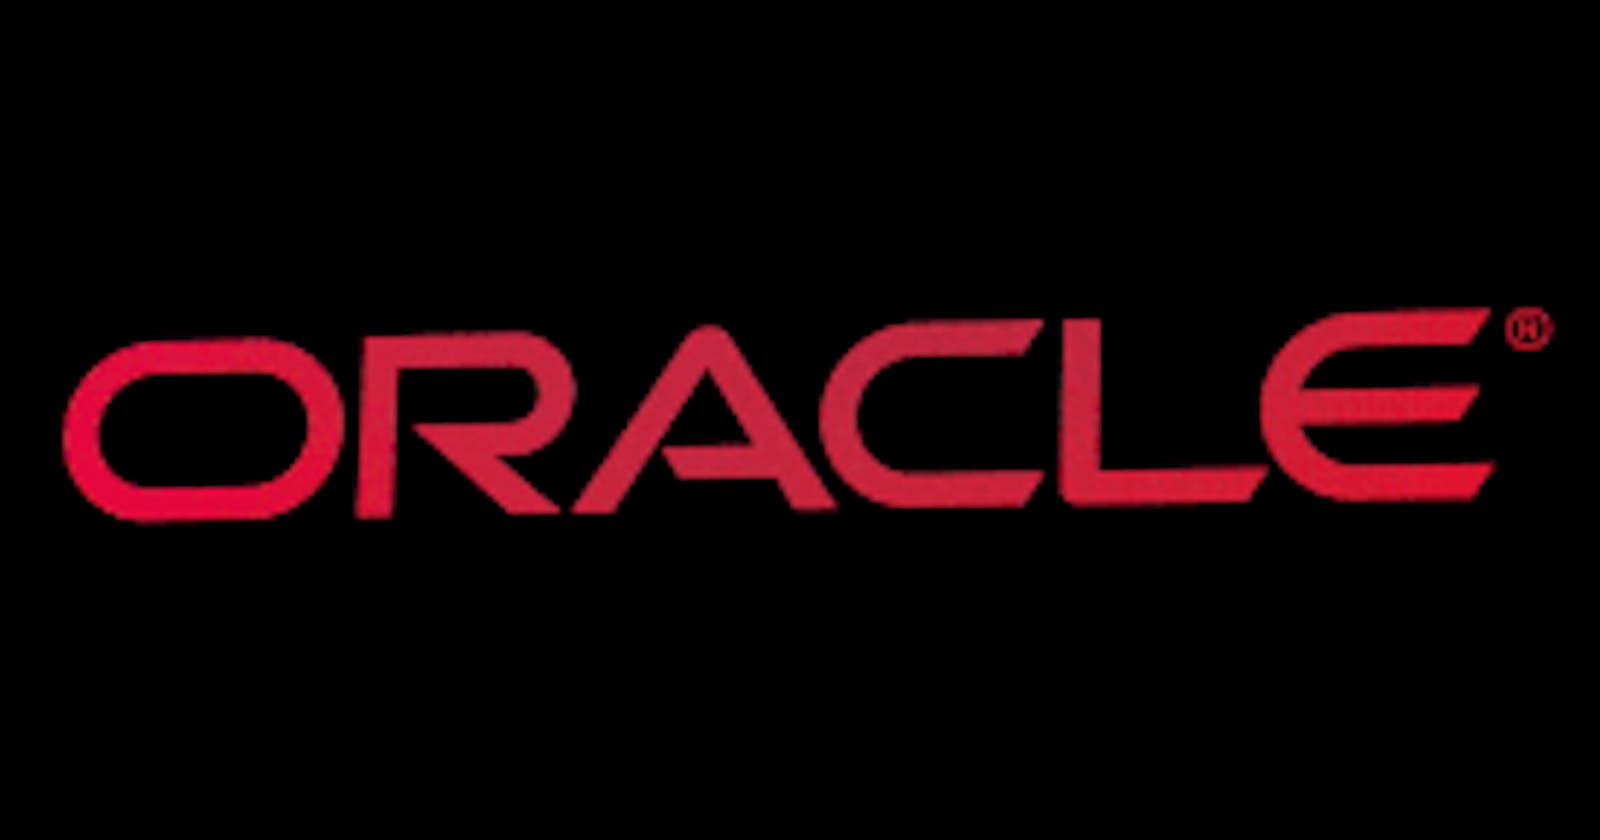 SOLVED: HOW TO RUN ROW PAGINATION ON ORACLE 11g AND 12c